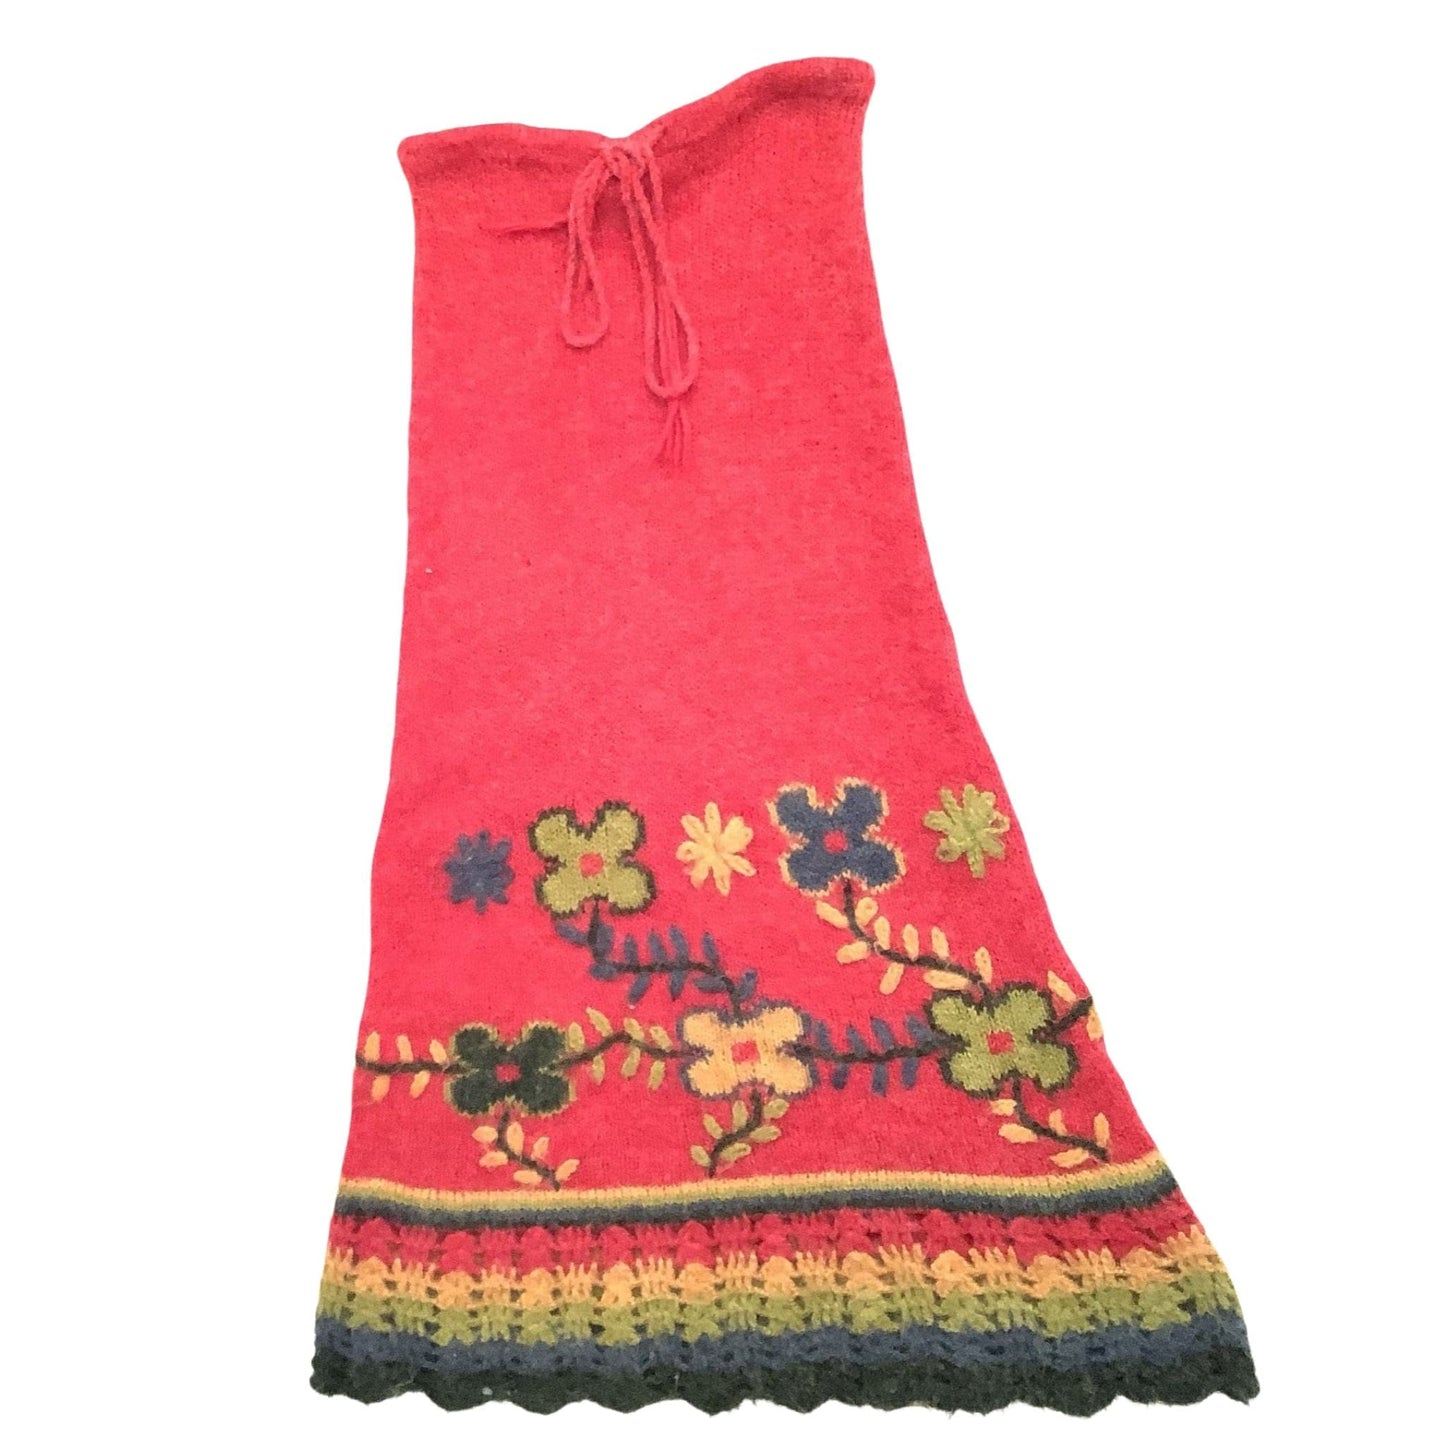 Boho Embroidered Maxi Skirt Small / Red / Y2K - Now